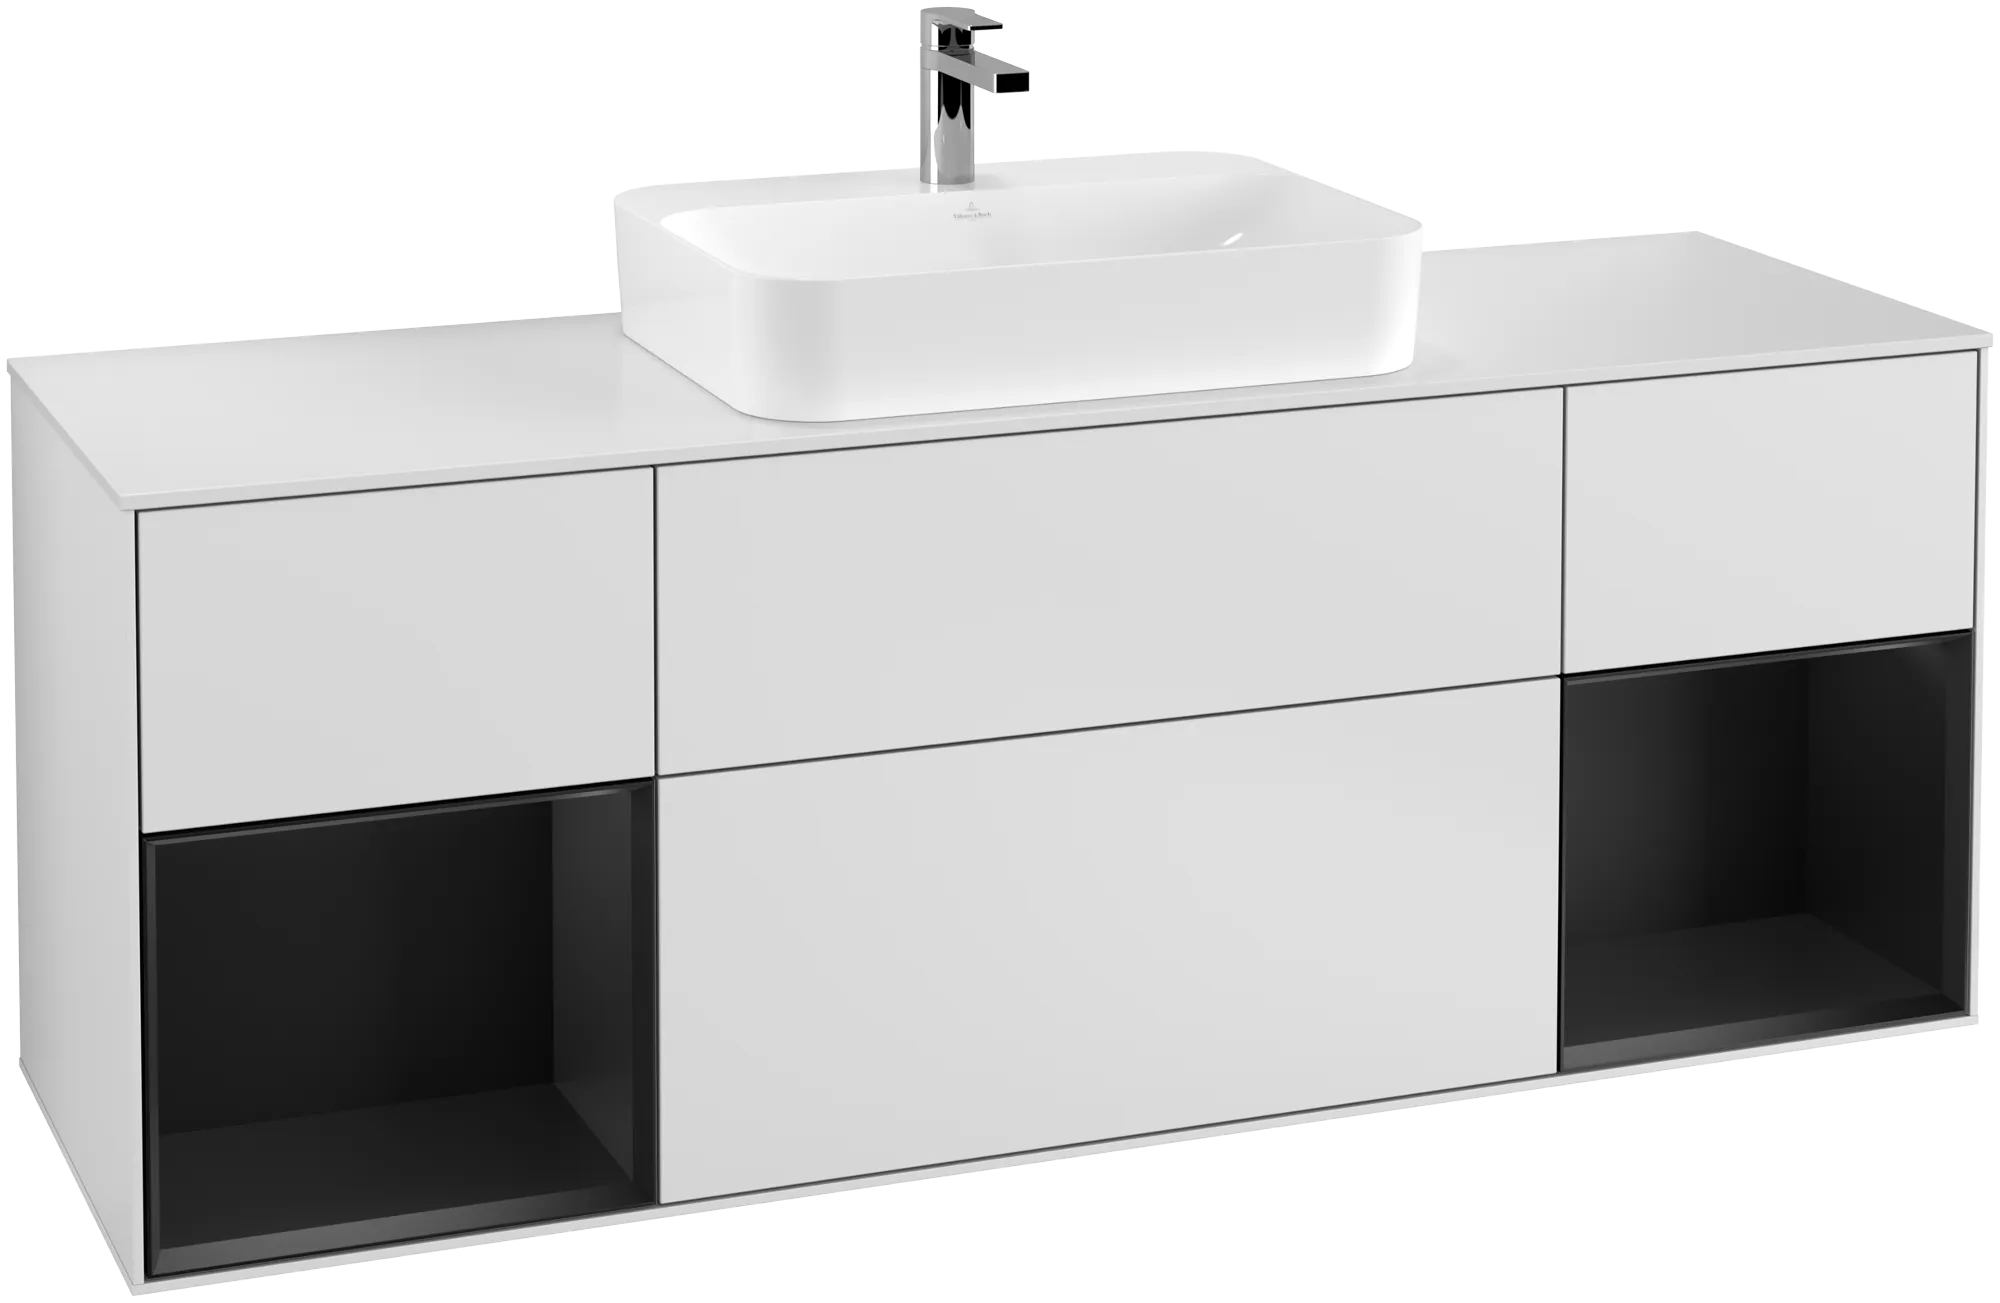 VILLEROY BOCH Finion Vanity unit, with lighting, 4 pull-out compartments, 1600 x 603 x 501 mm, White Matt Lacquer / Black Matt Lacquer / Glass White Matt #G451PDMT resmi